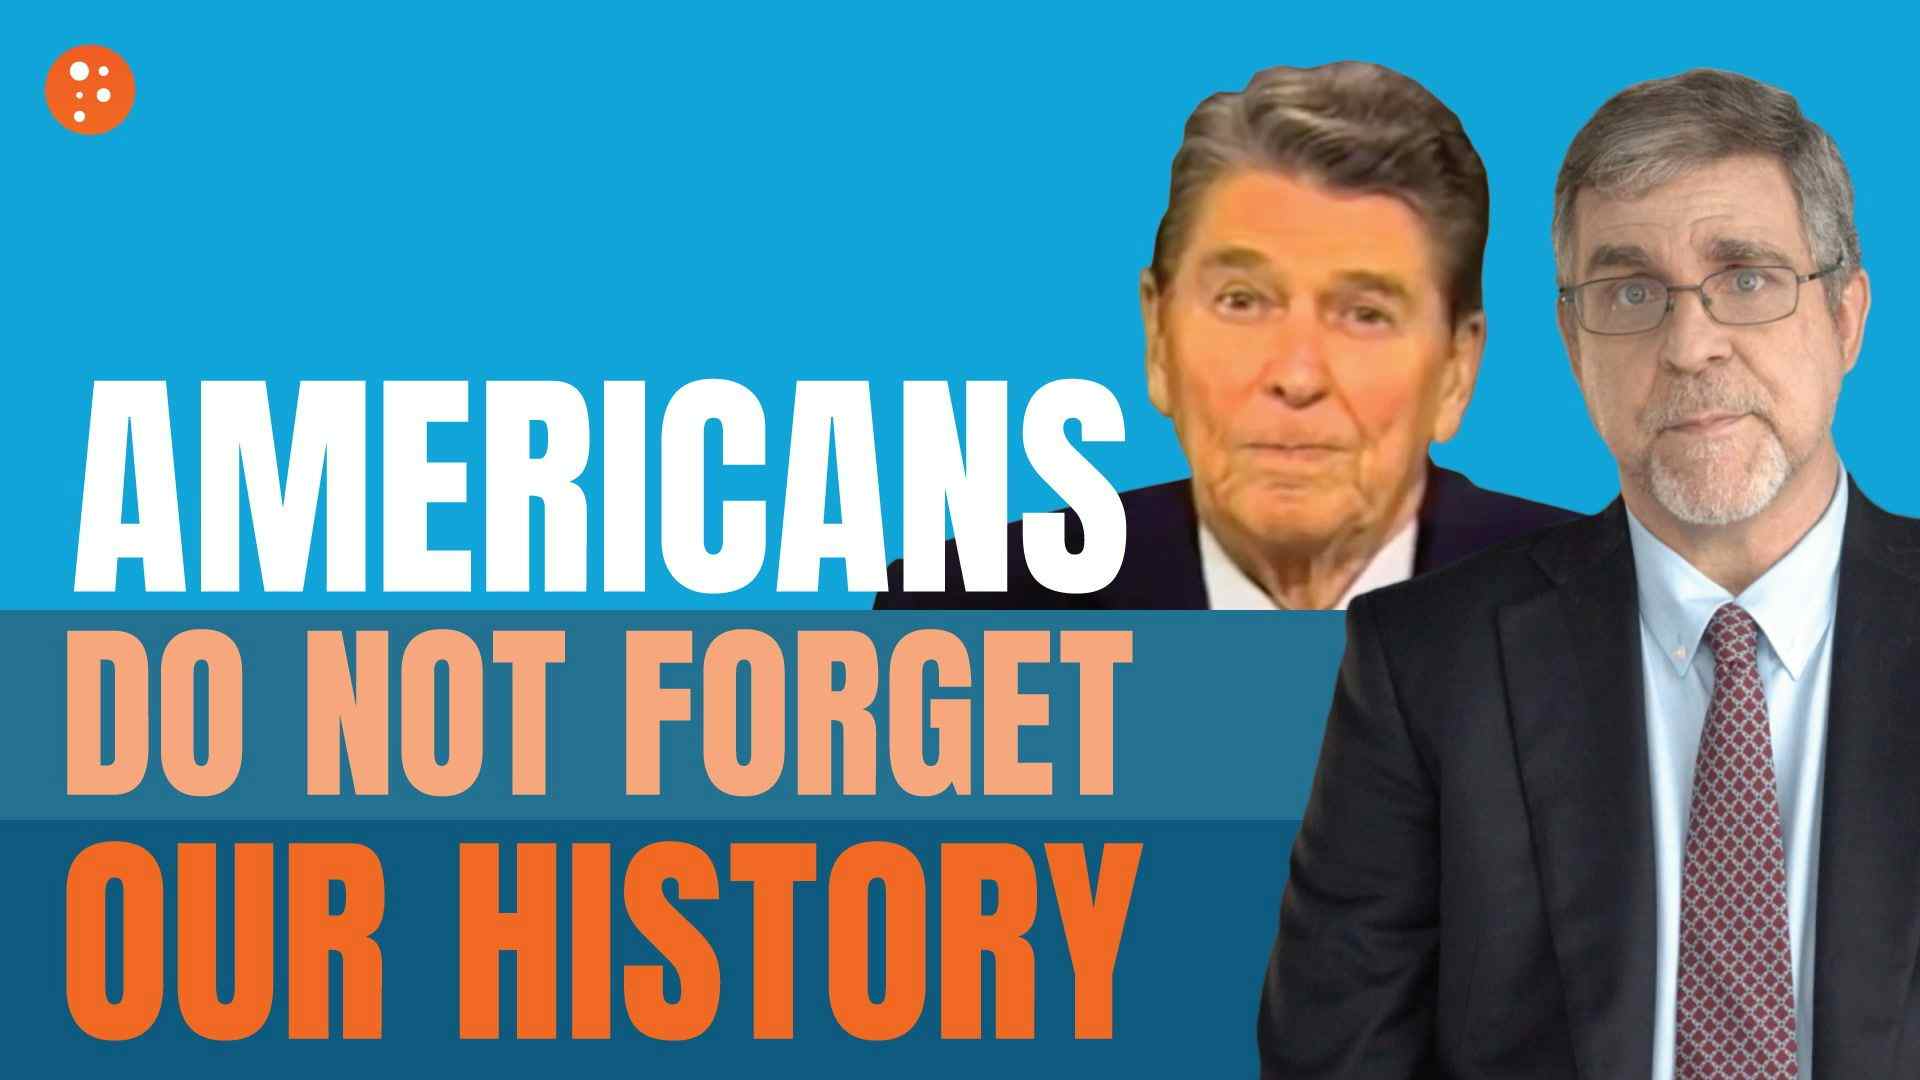 Reagan Warns America Not to Forget Our History